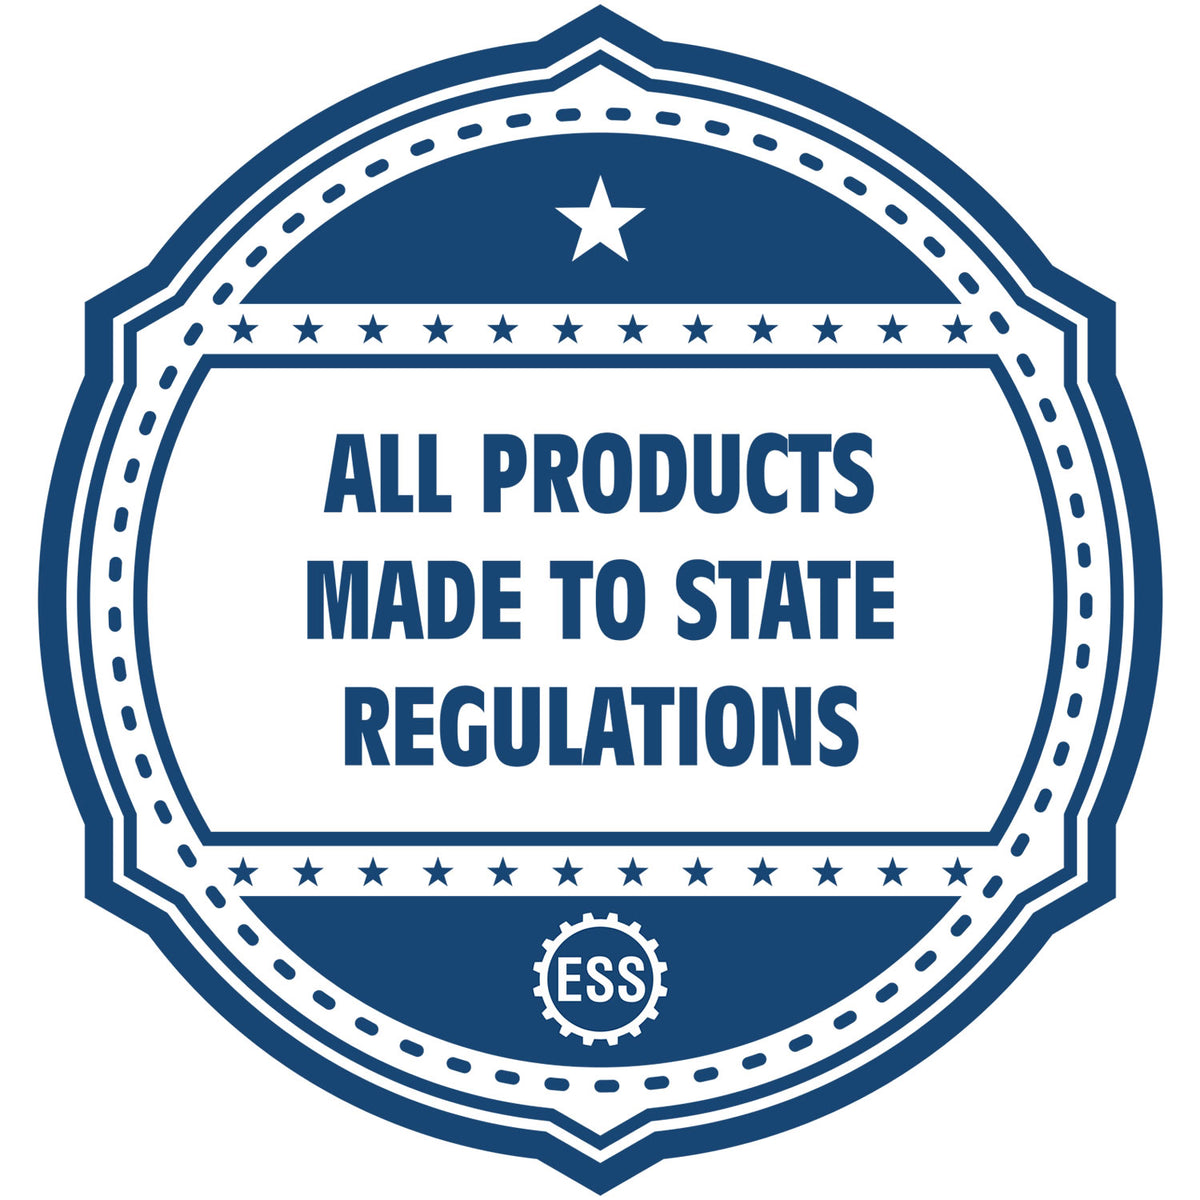 An icon or badge element for the Digital Florida PE Stamp and Electronic Seal for Florida Engineer showing that this product is made in compliance with state regulations.